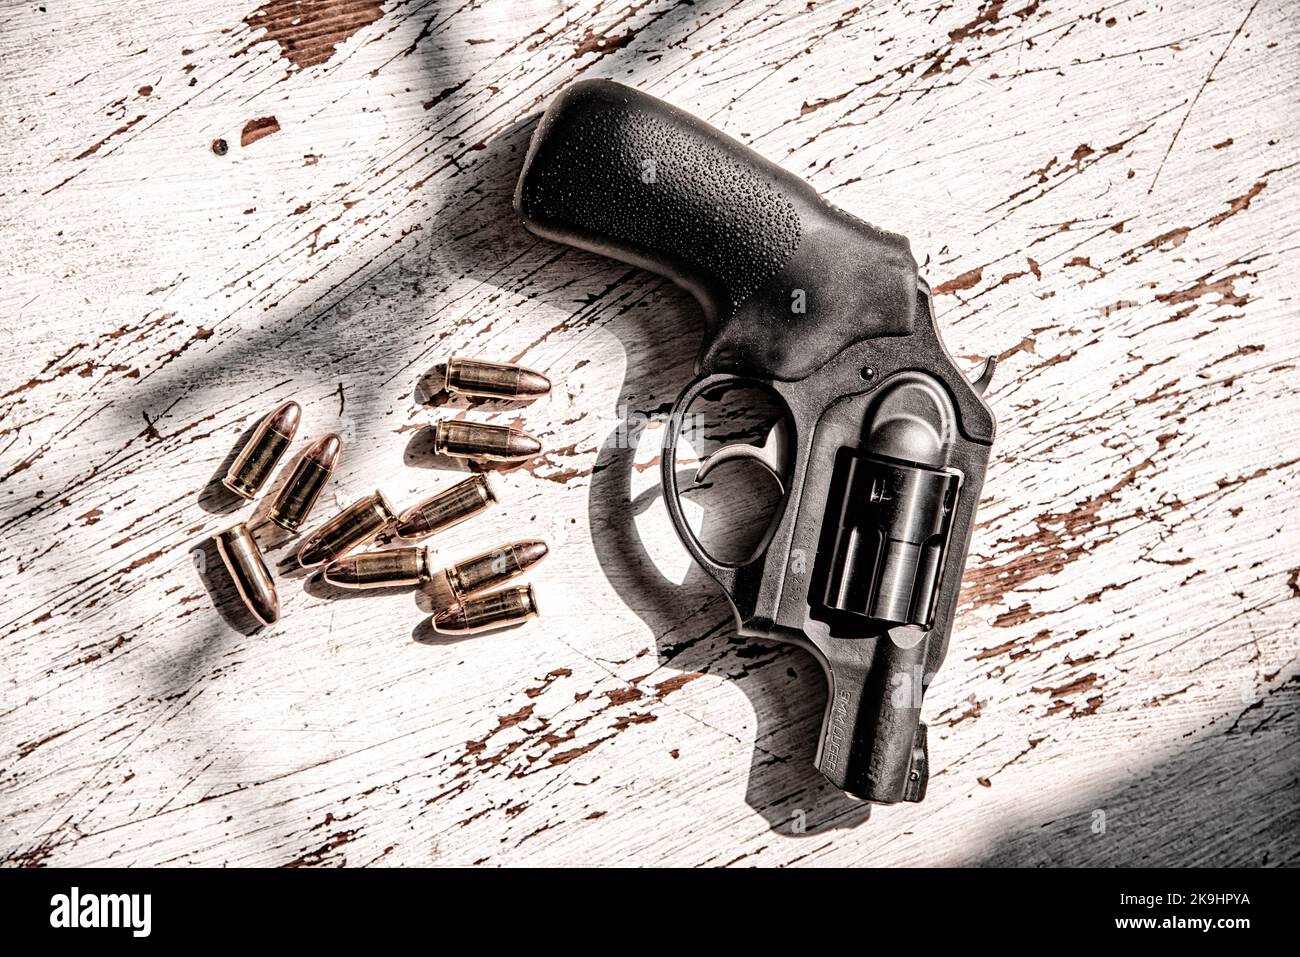 A black, Ruger, 9mm, snub-nosed revolver along with a grouping of 9mm bullets. Stock Photo